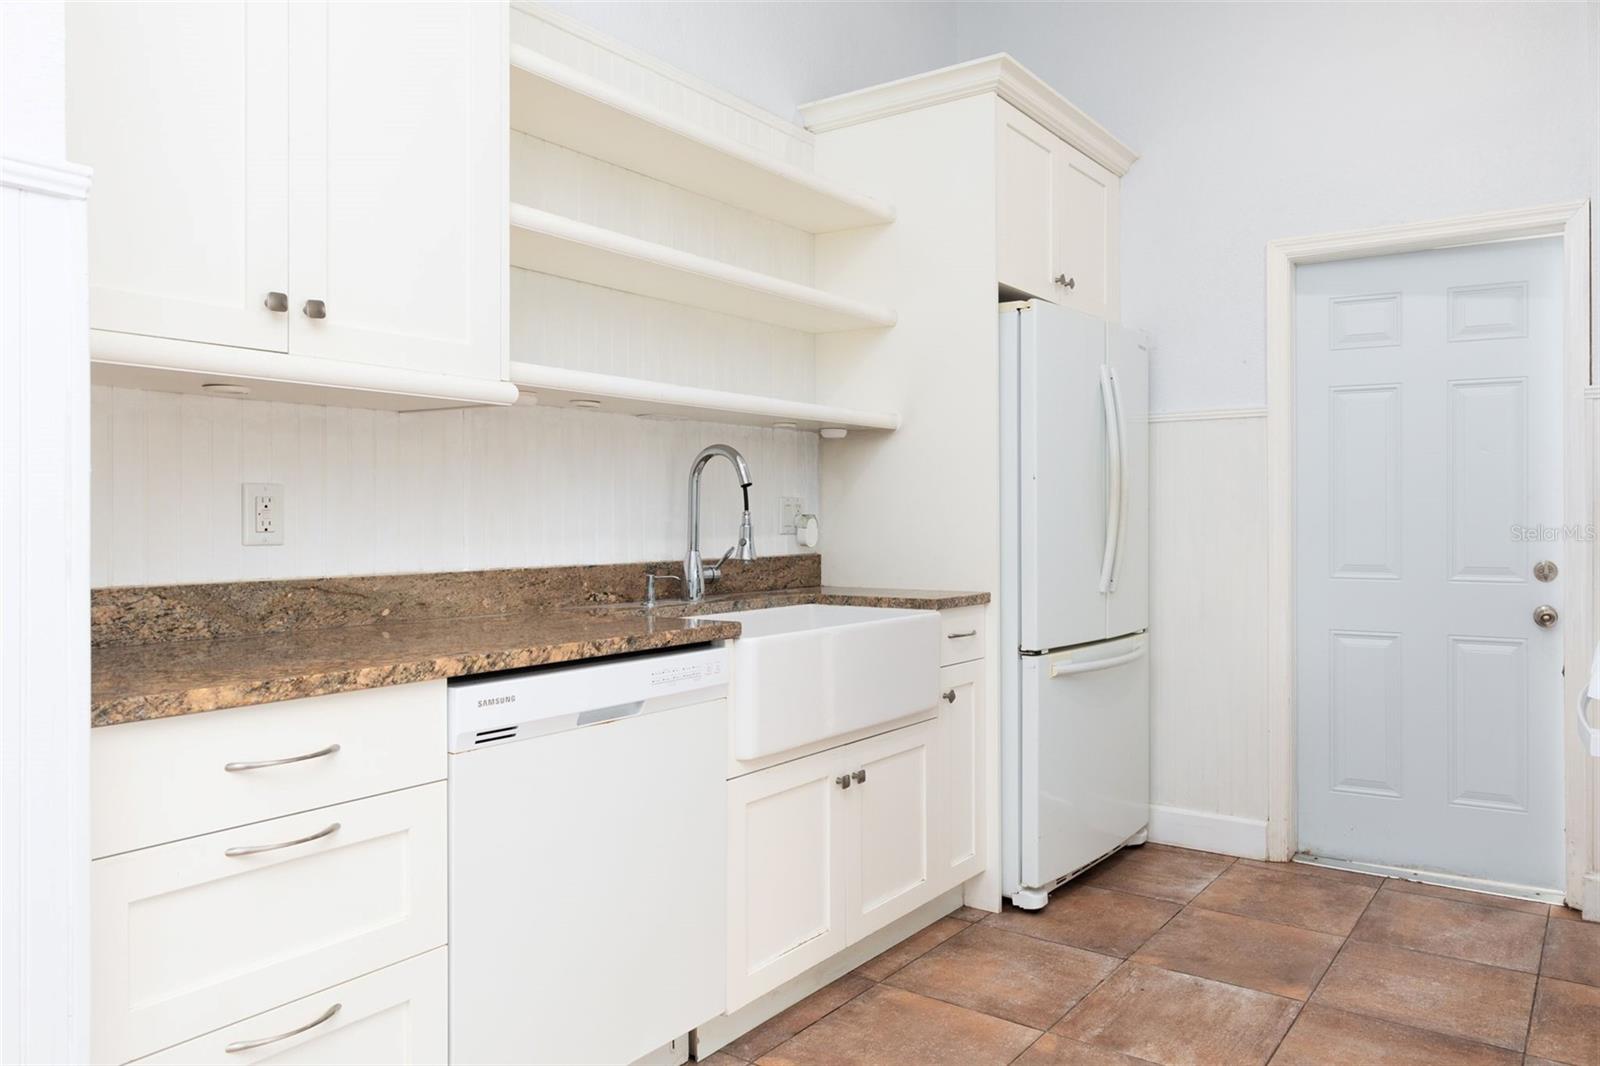 Kitchen to front Door in Accessory Dwelling Space